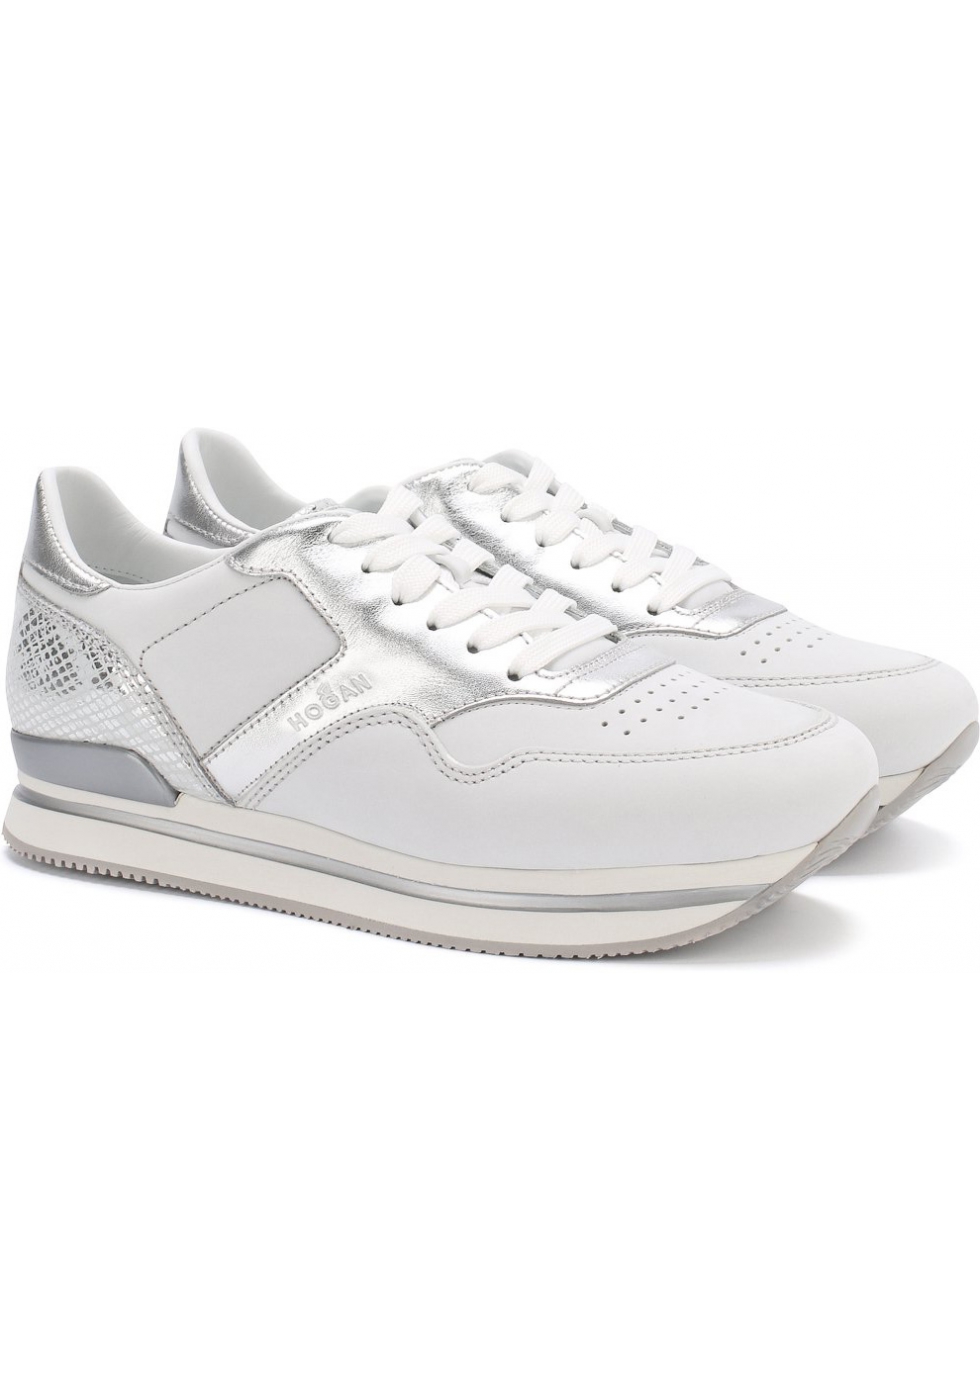 Hogan women's wedge sneakers in white and silver leather - Italian Boutique